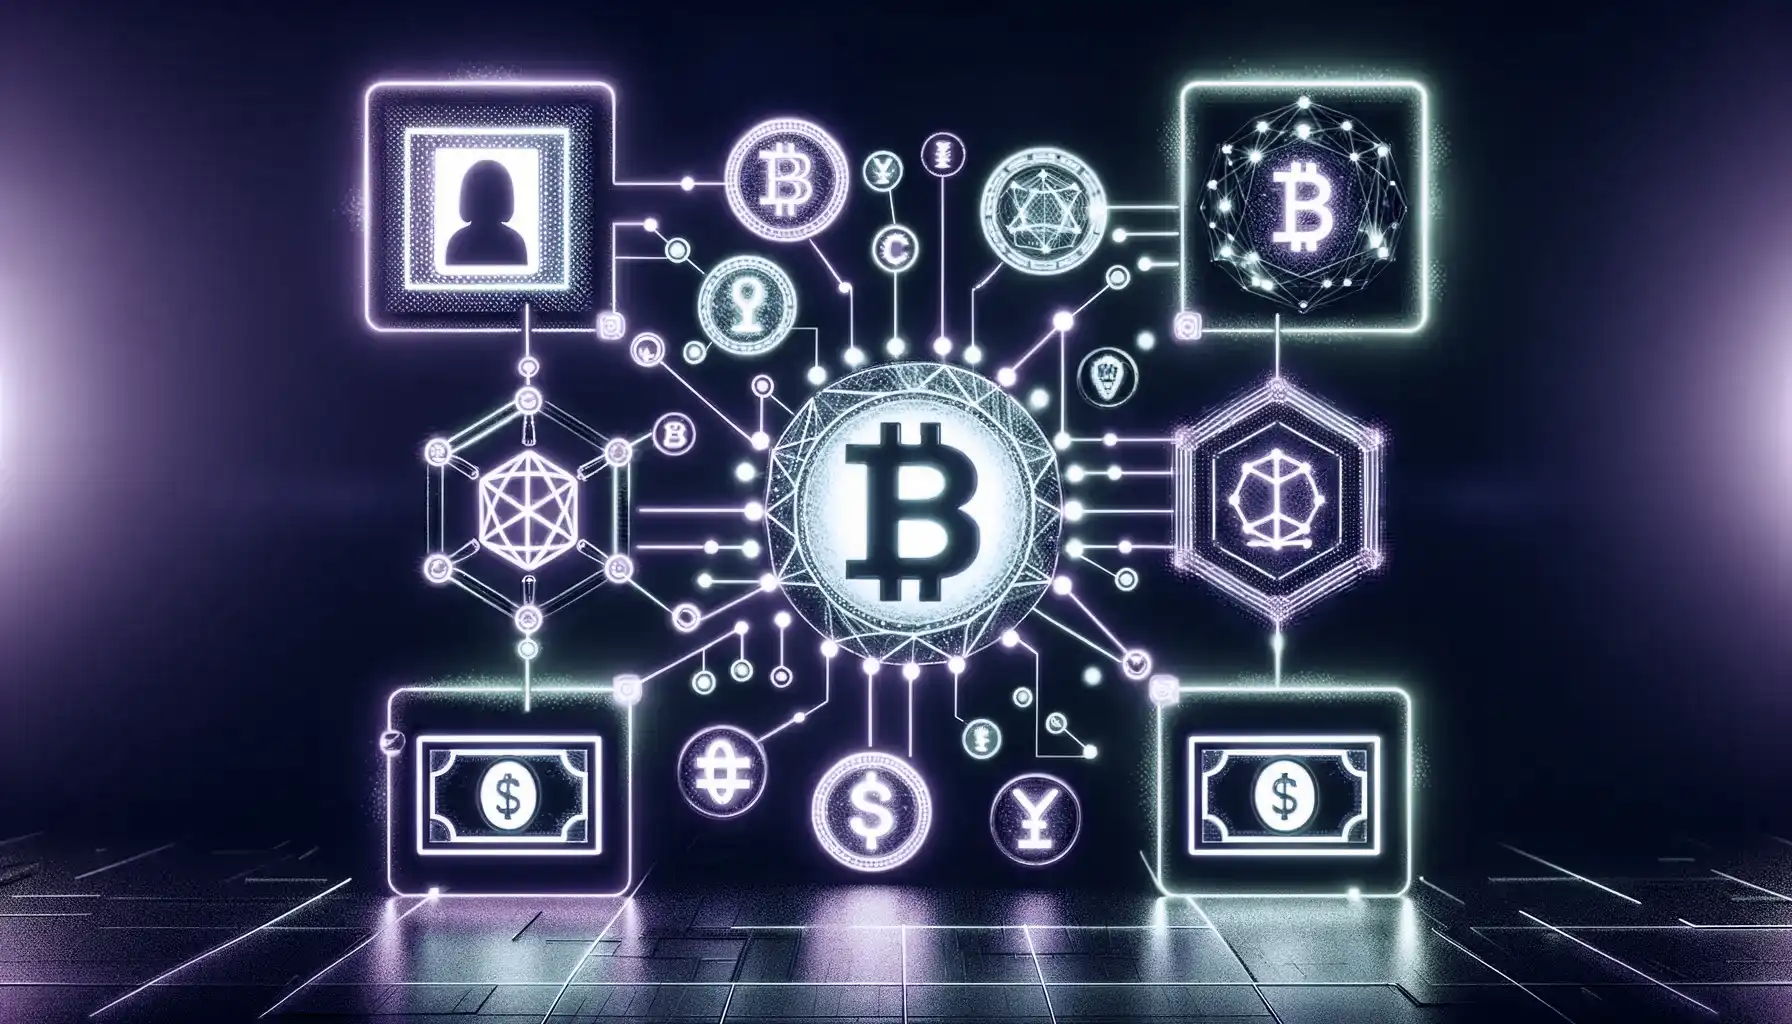 This image is a visual representation for a blockchain solutions landing page, focusing on reinventing identity, future supply chain, and financial aspects using blockchain technology. It features distinct symbolic icons: a digital ID card, a network representing supply chain management, and currency symbols, all seamlessly integrated into a blockchain structure. These elements are interconnected with intricate neon lines in shades of green and purple, highlighting the seamless integration and interaction of identity verification, supply chain management, and financial transactions within the blockchain framework. The background is a minimalistic digital space, emphasizing the key elements and their interconnectedness, portraying a sophisticated and futuristic approach to financial infrastructure solutions through blockchain technology.